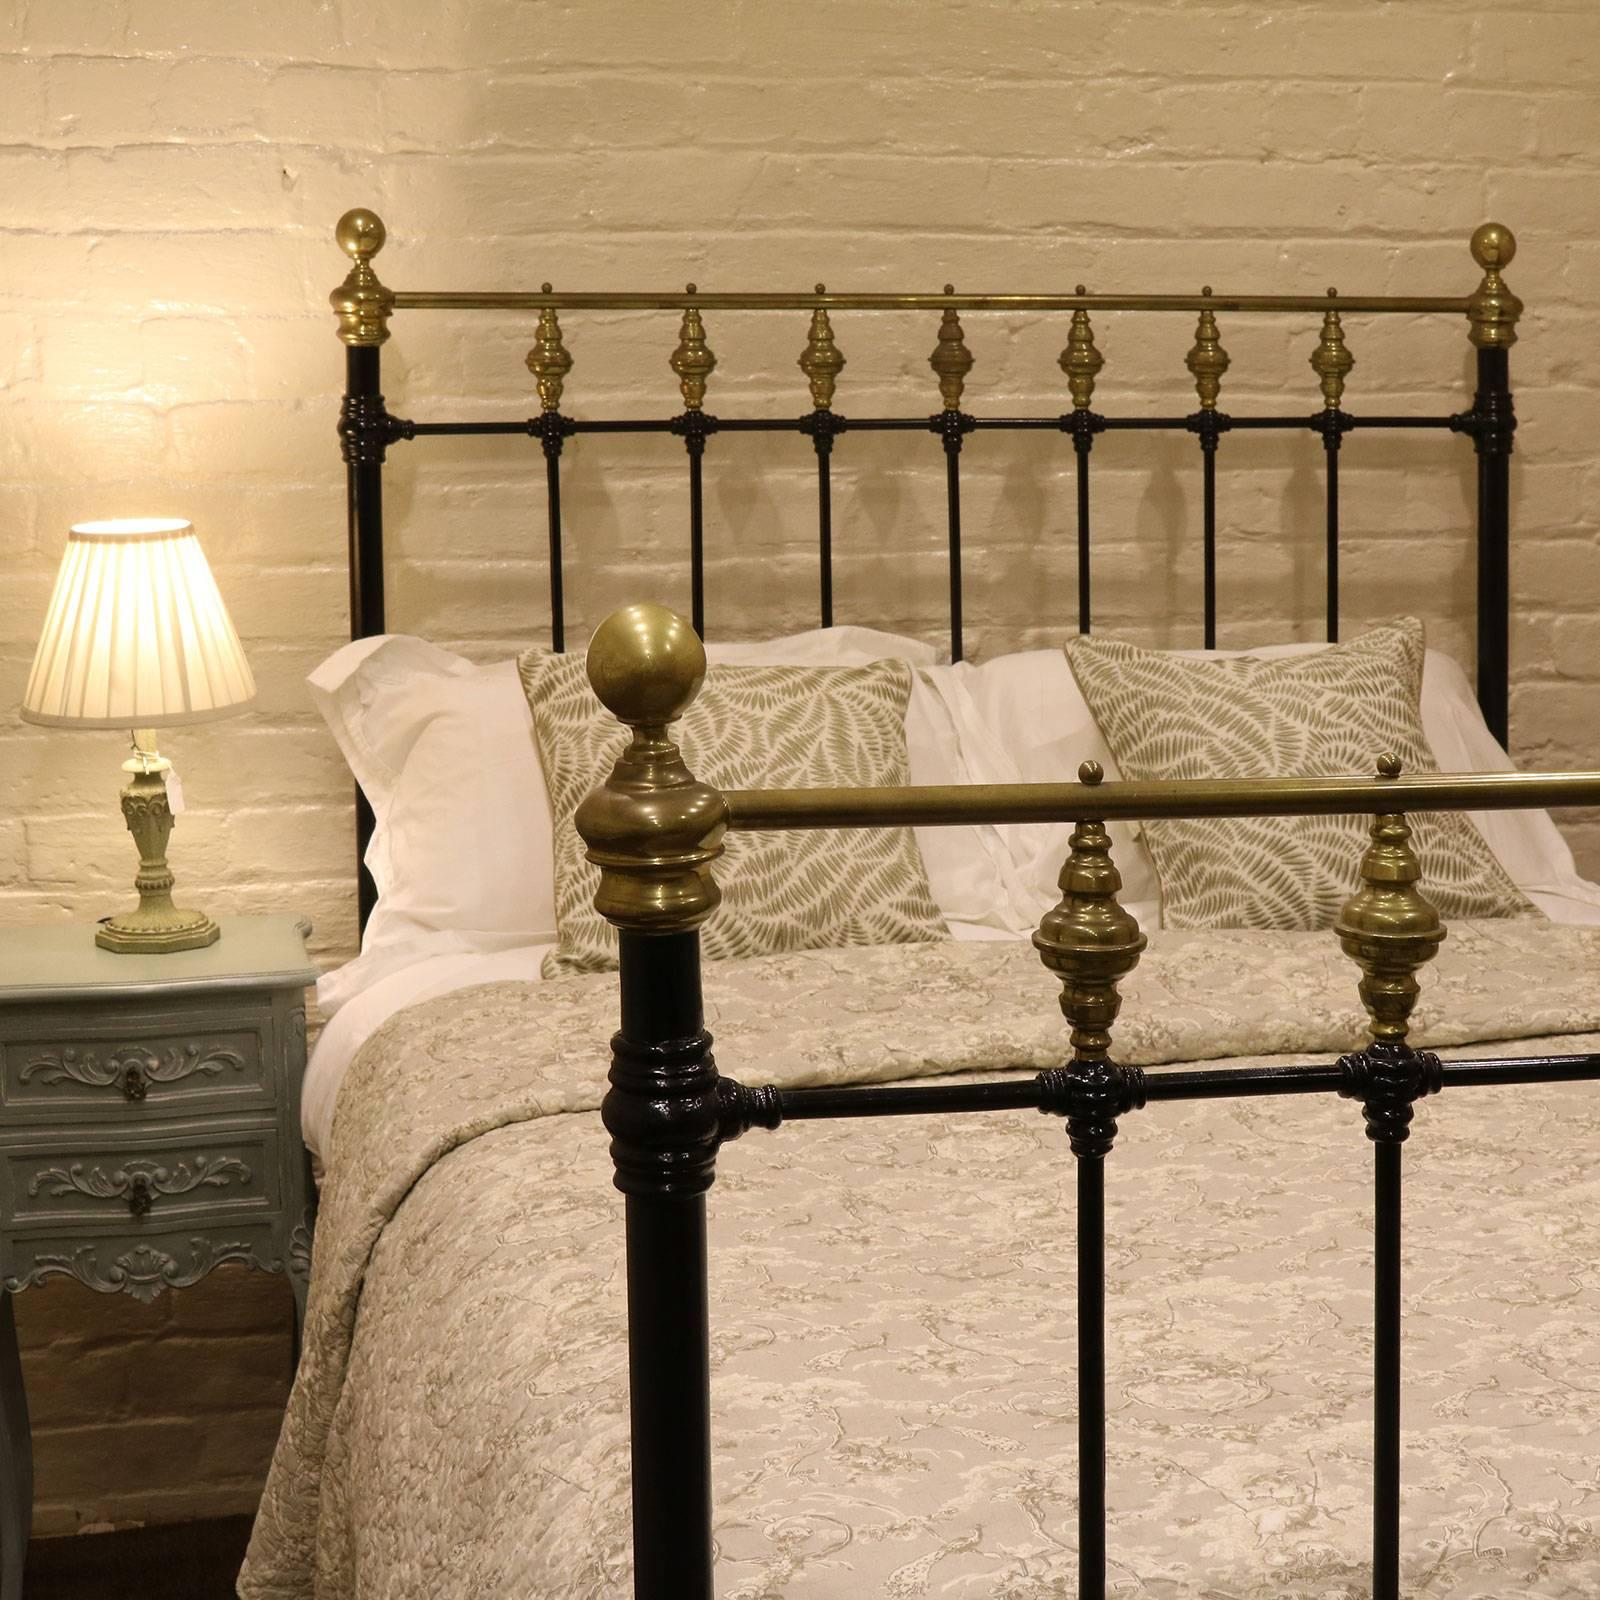 A Classic style Victorian brass and iron bed finished in black with a gallery of brass trumpets on head and foot panels.

This bed accepts a standard double (54 in wide) base and mattress set.

The price is for the bed alone. The base, mattress,